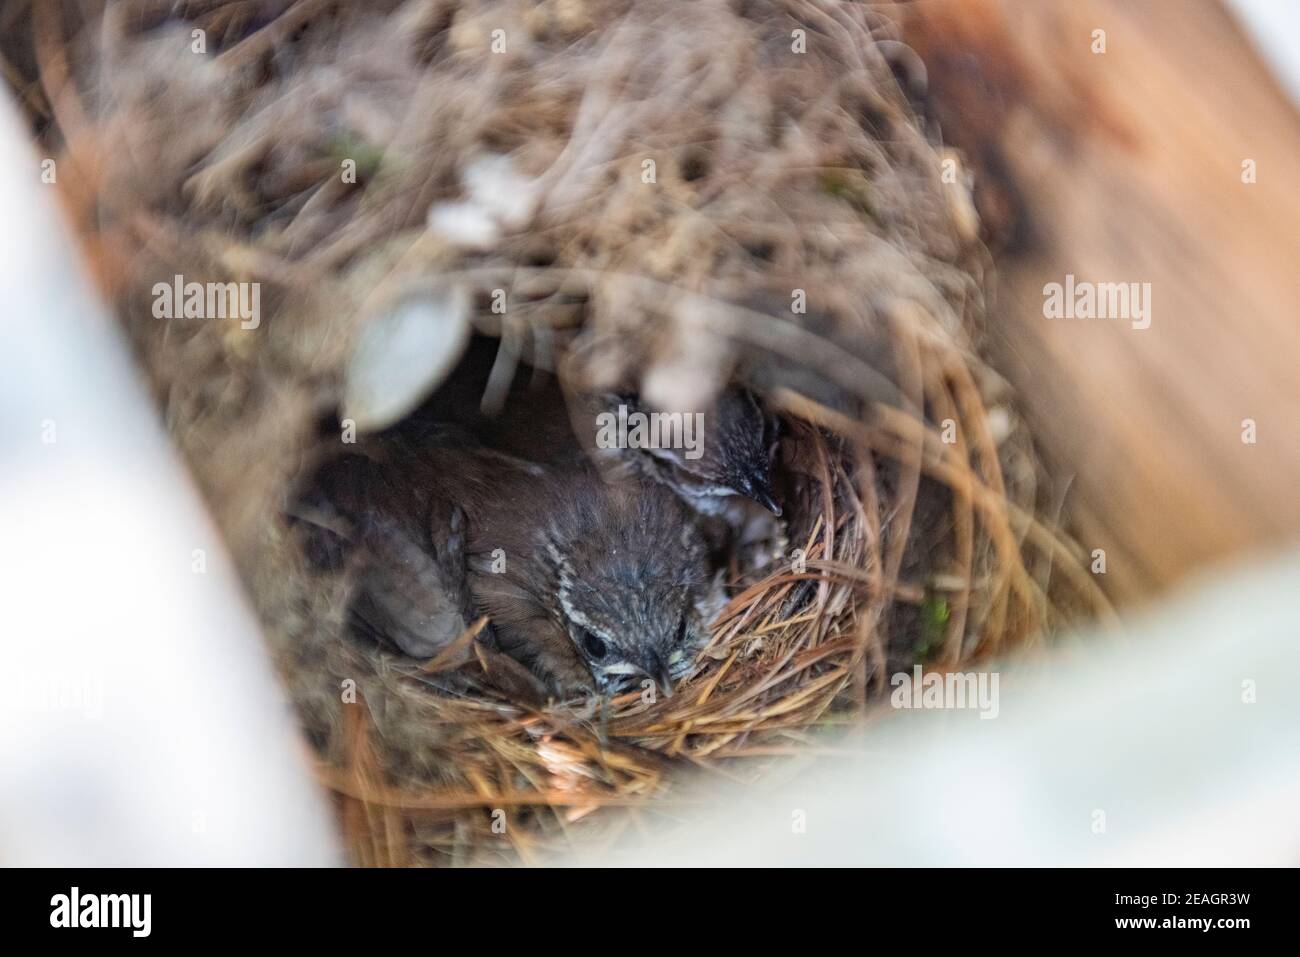 Carolina Wren (Thryothorus Ludovicianus) Baby Chicks in Bird Nest. Series of consecutive days showing growth, frame 12 of 12 Stock Photo